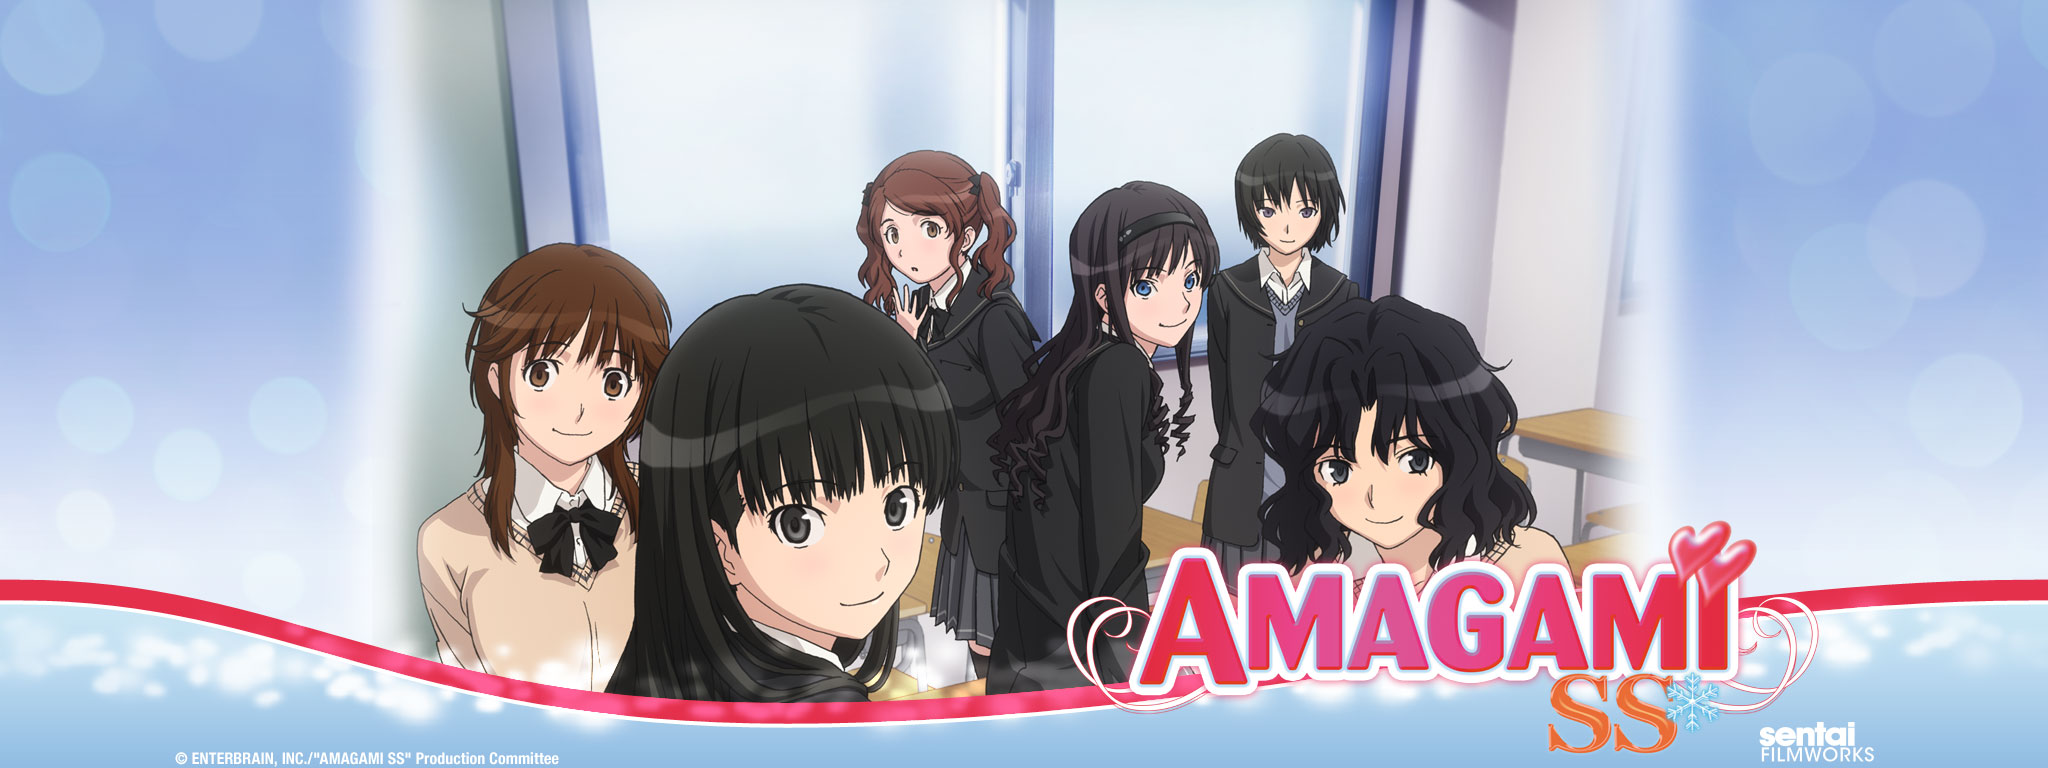 Title Art for Amagami SS